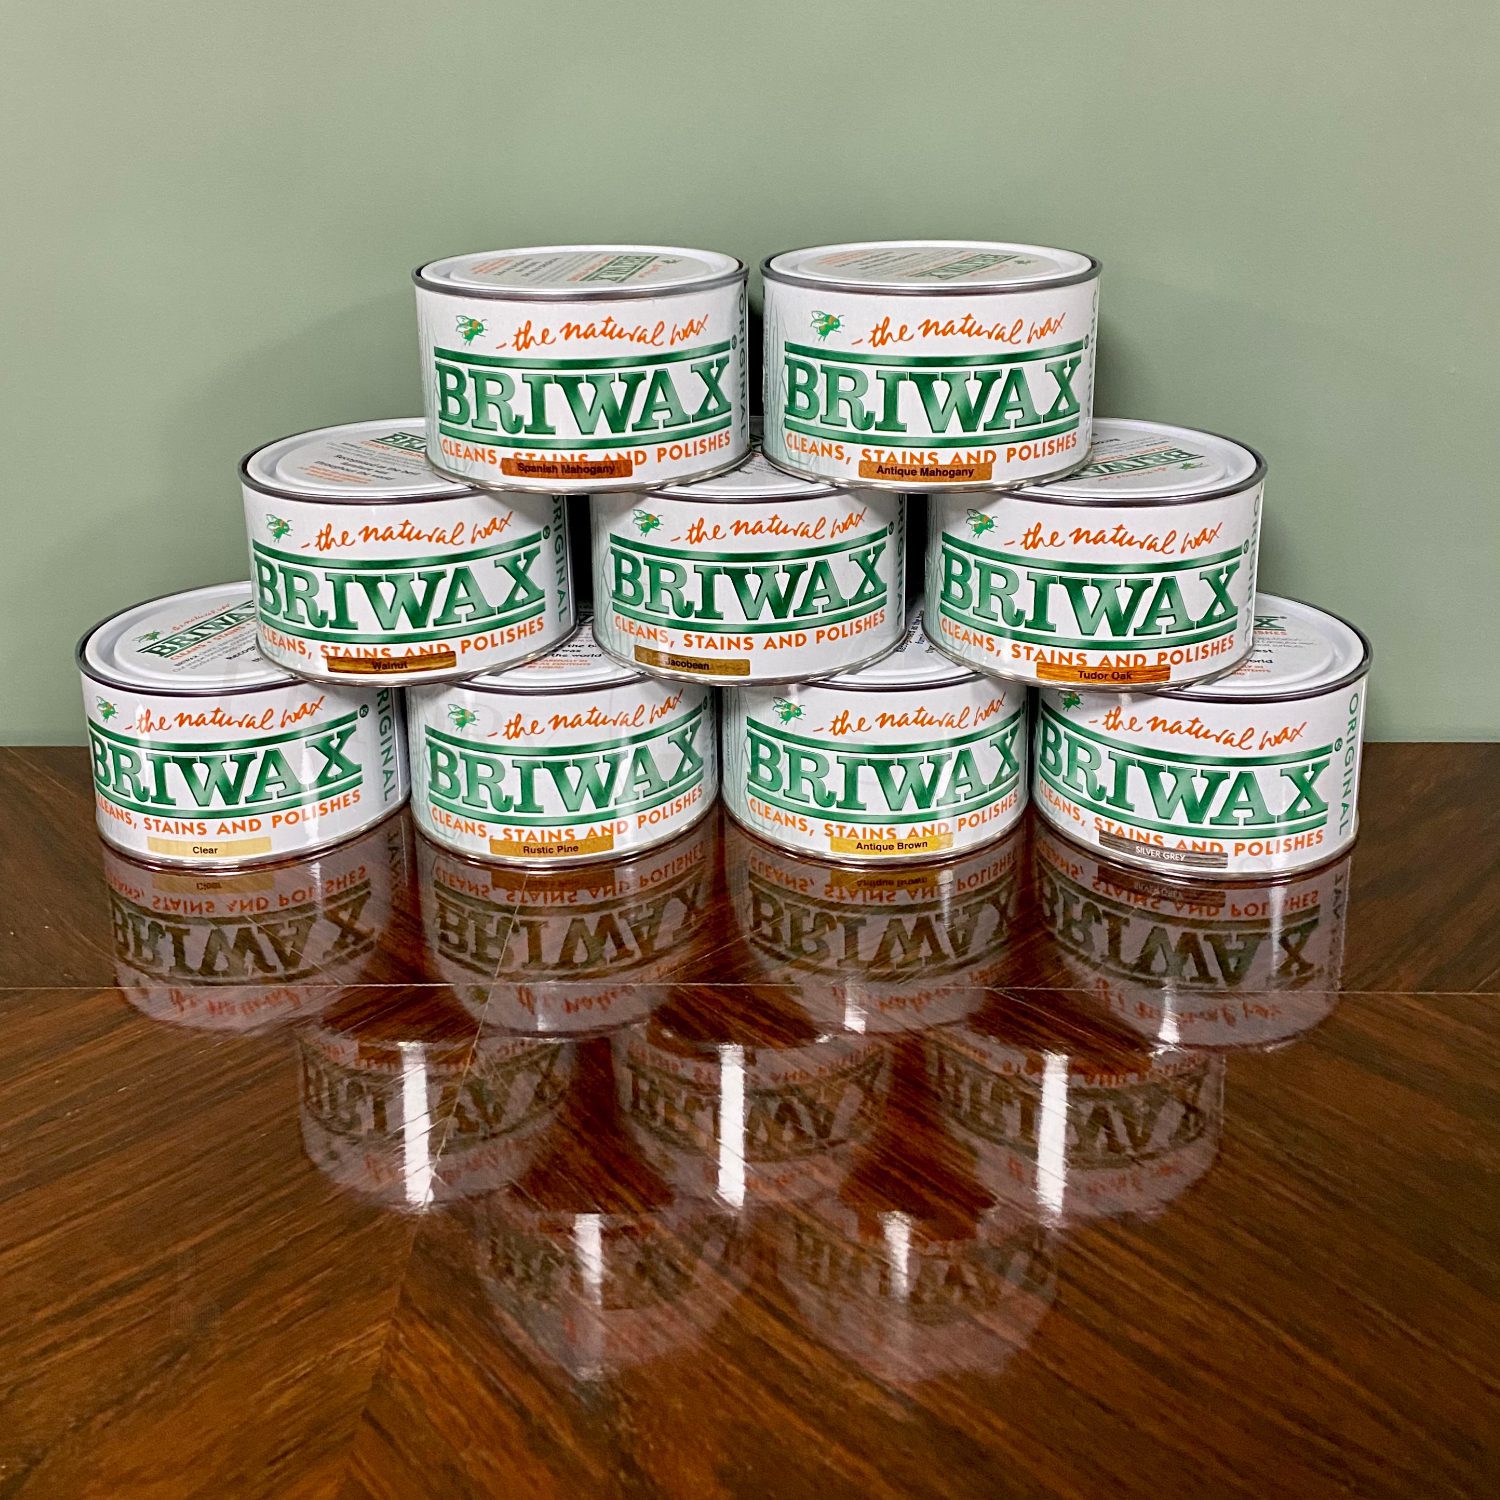 Briwax (Rustic Pine) Furniture Wax Polish, Cleans, Stains, and Polishes 